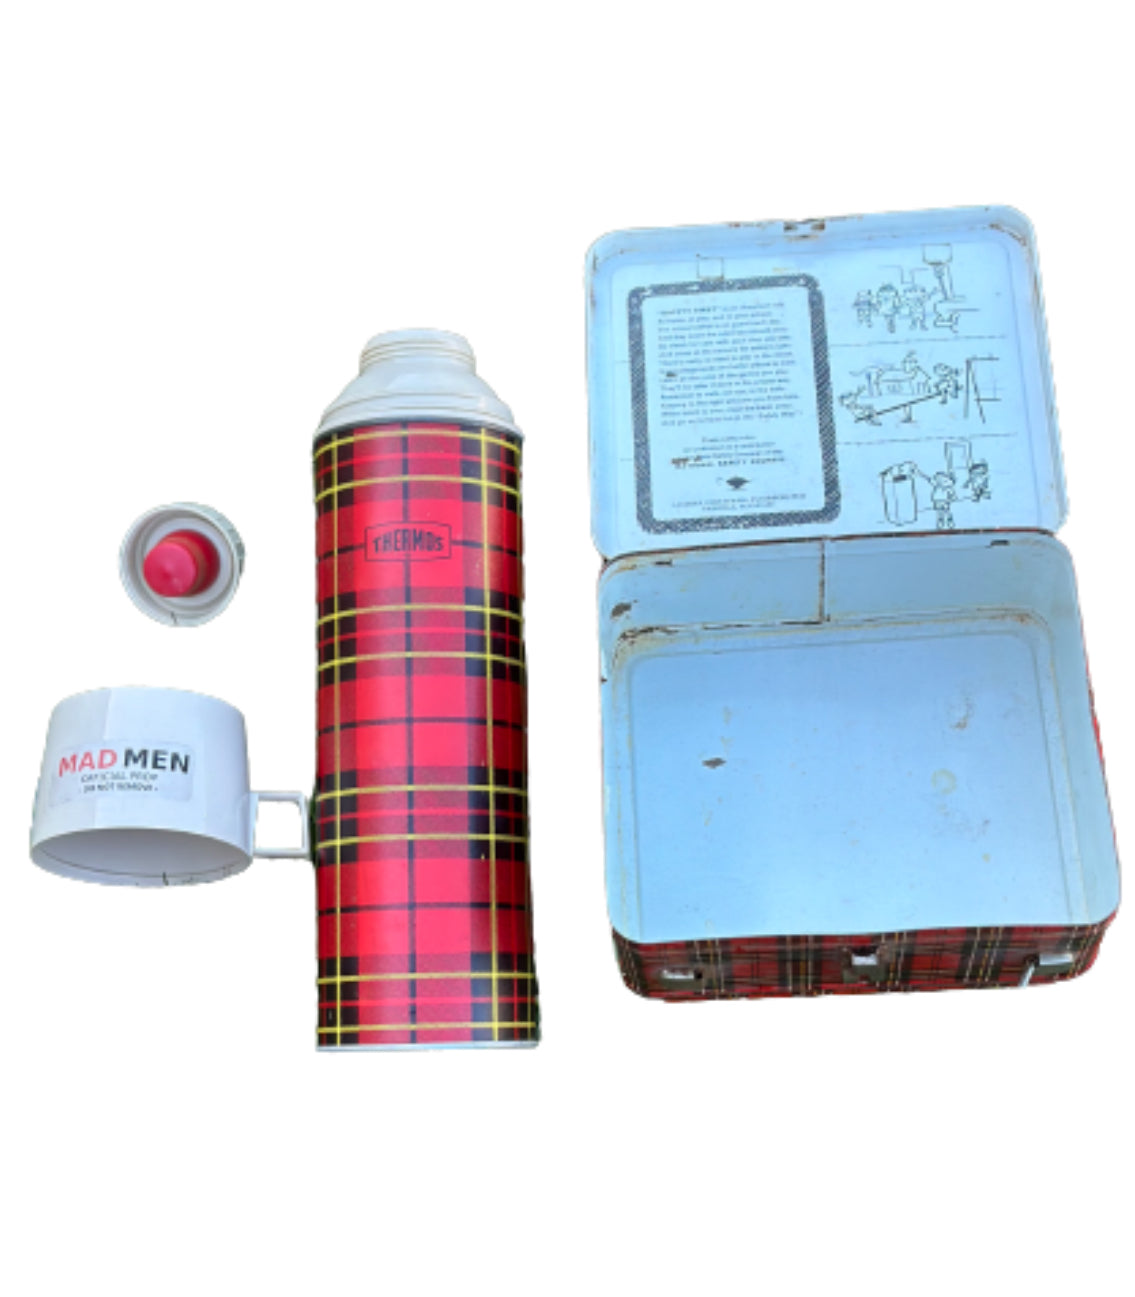 MAD MEN: Pete’s Vintage red plaid Thermos and Lunchbox